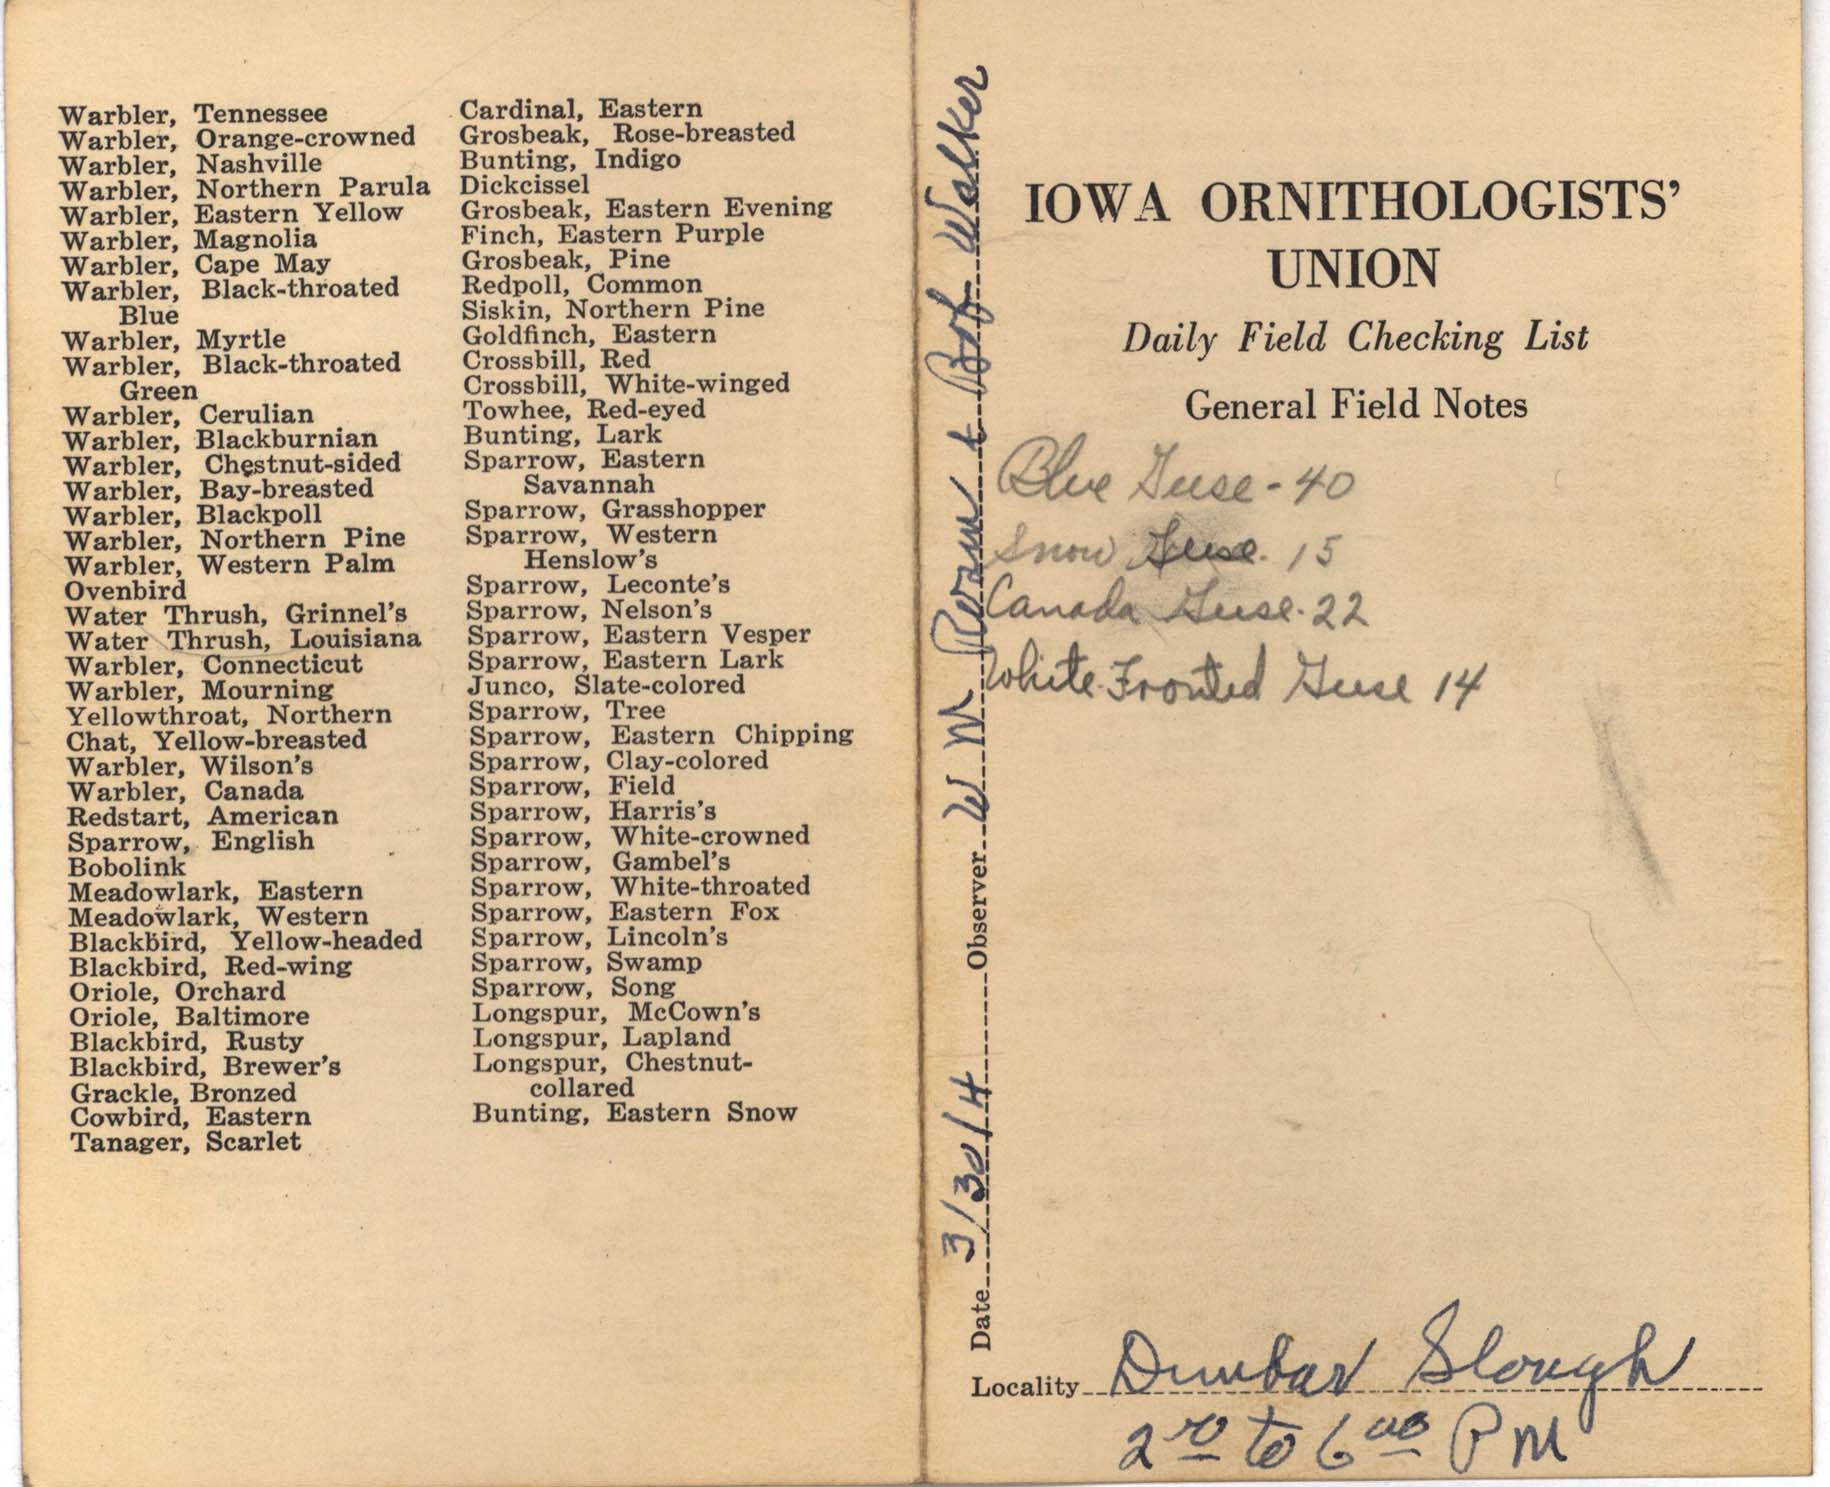 Daily field checking list by Walter Rosene, March 30, 1941